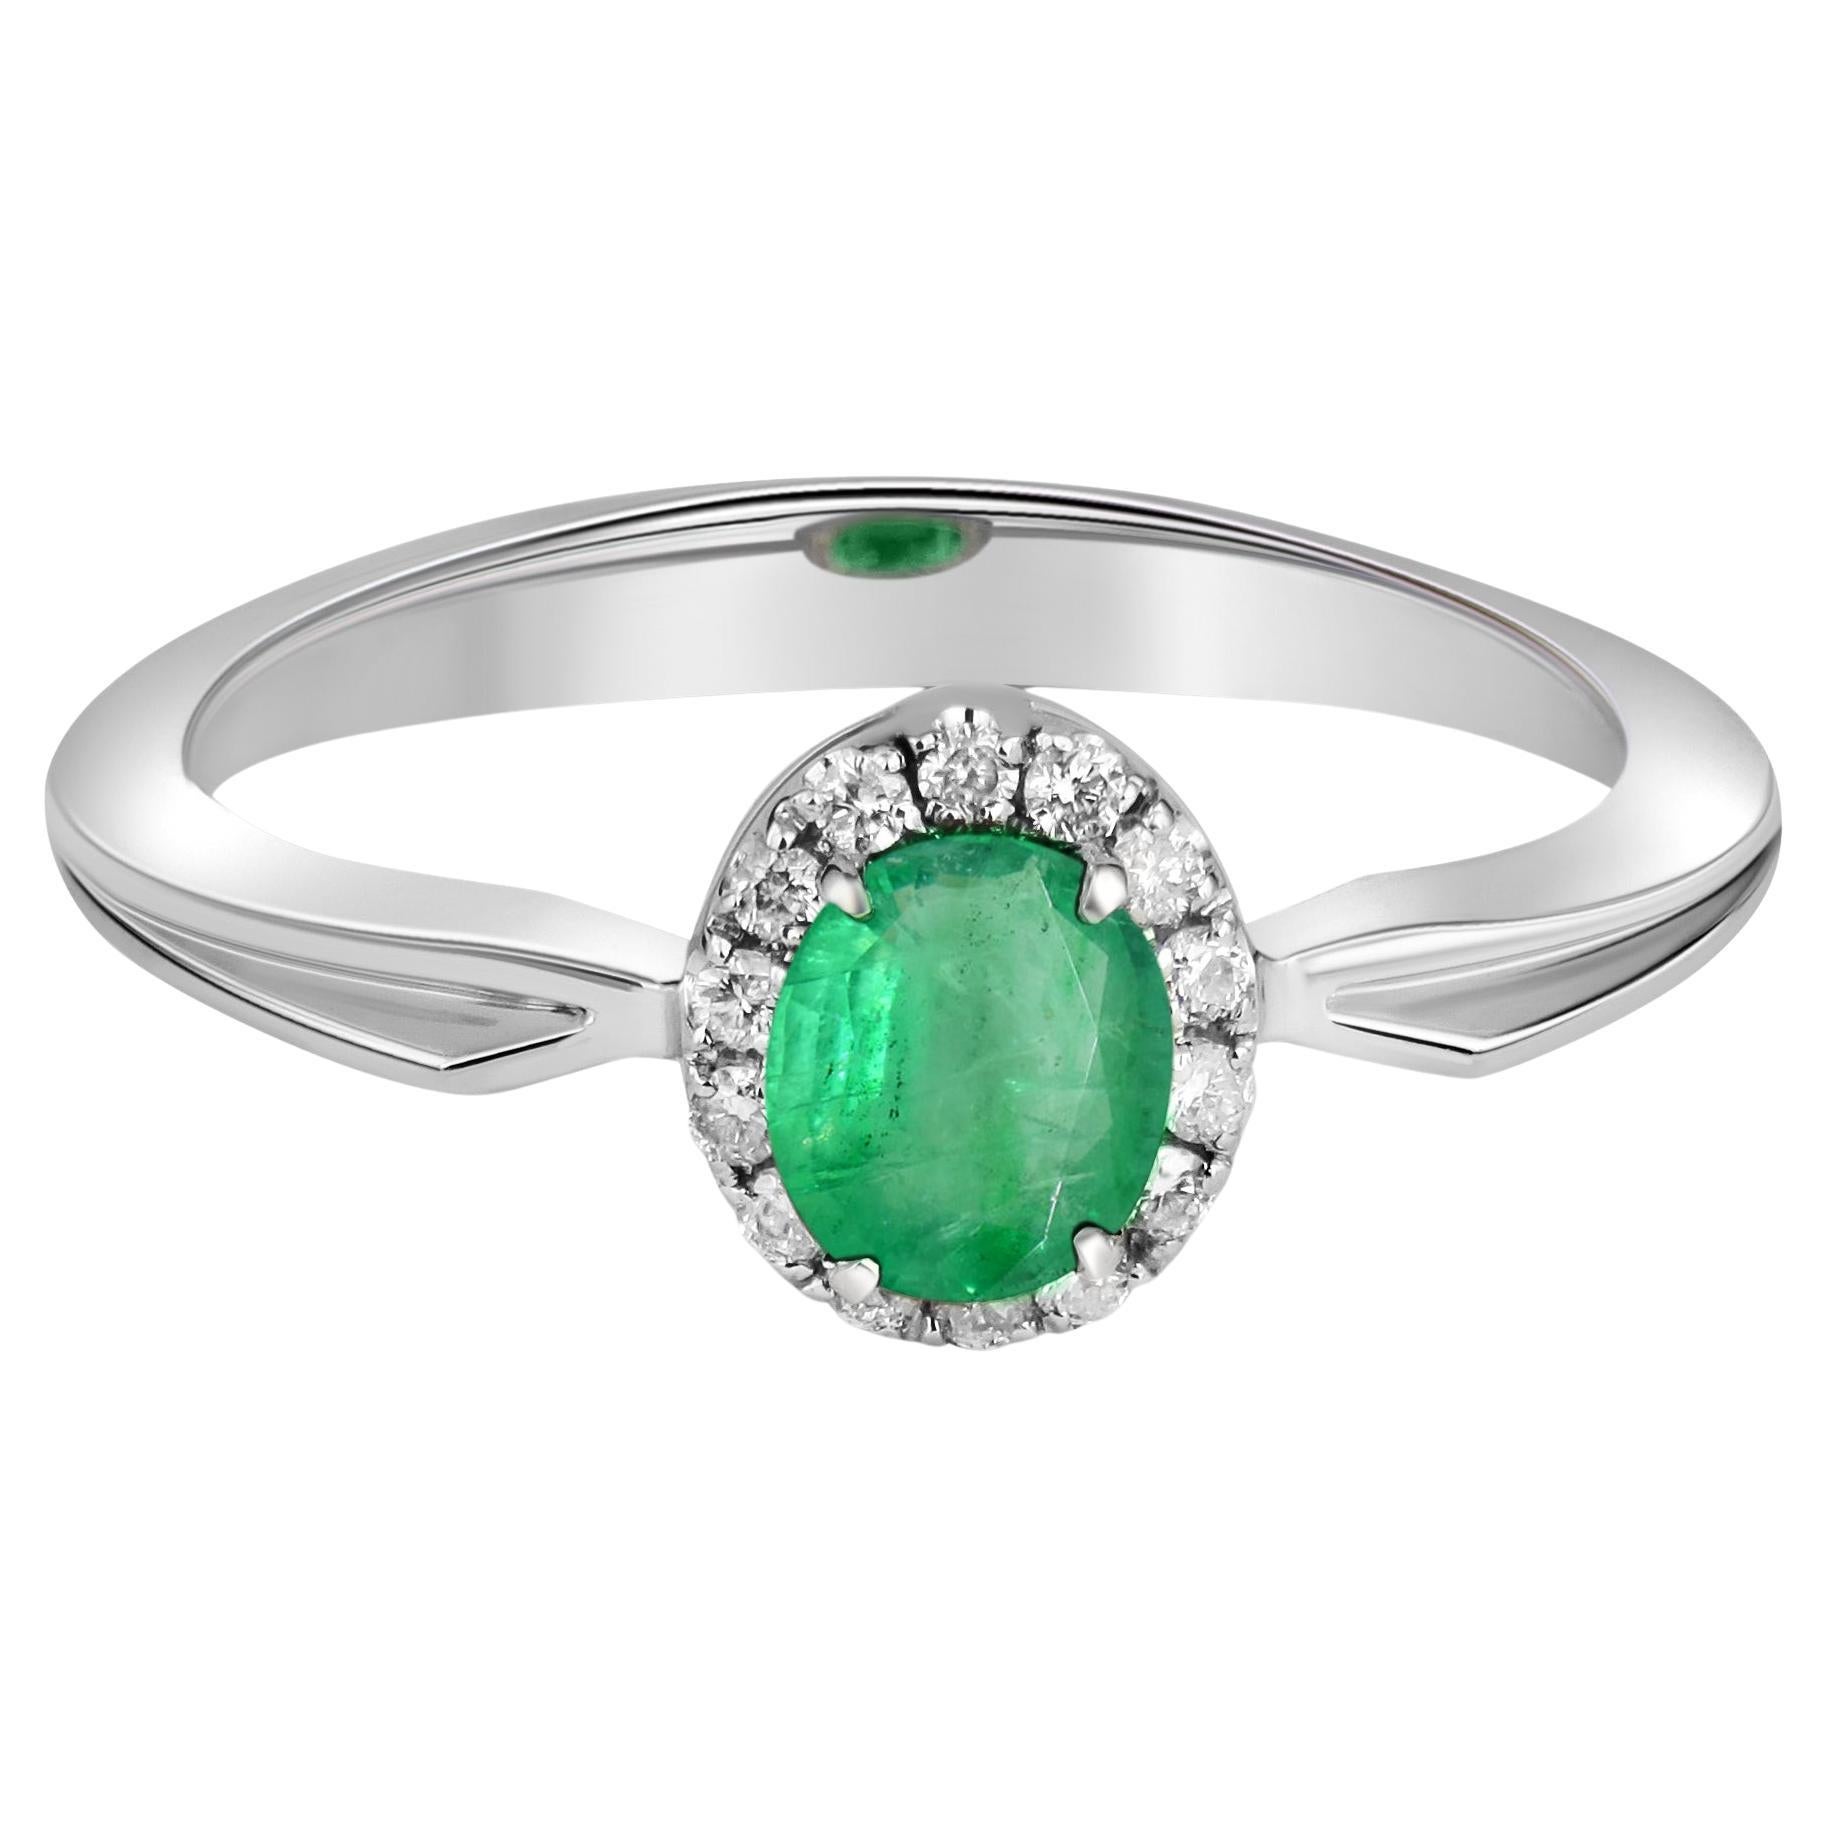 For Sale:  Emerald and Diamonds 14k Gold Ring